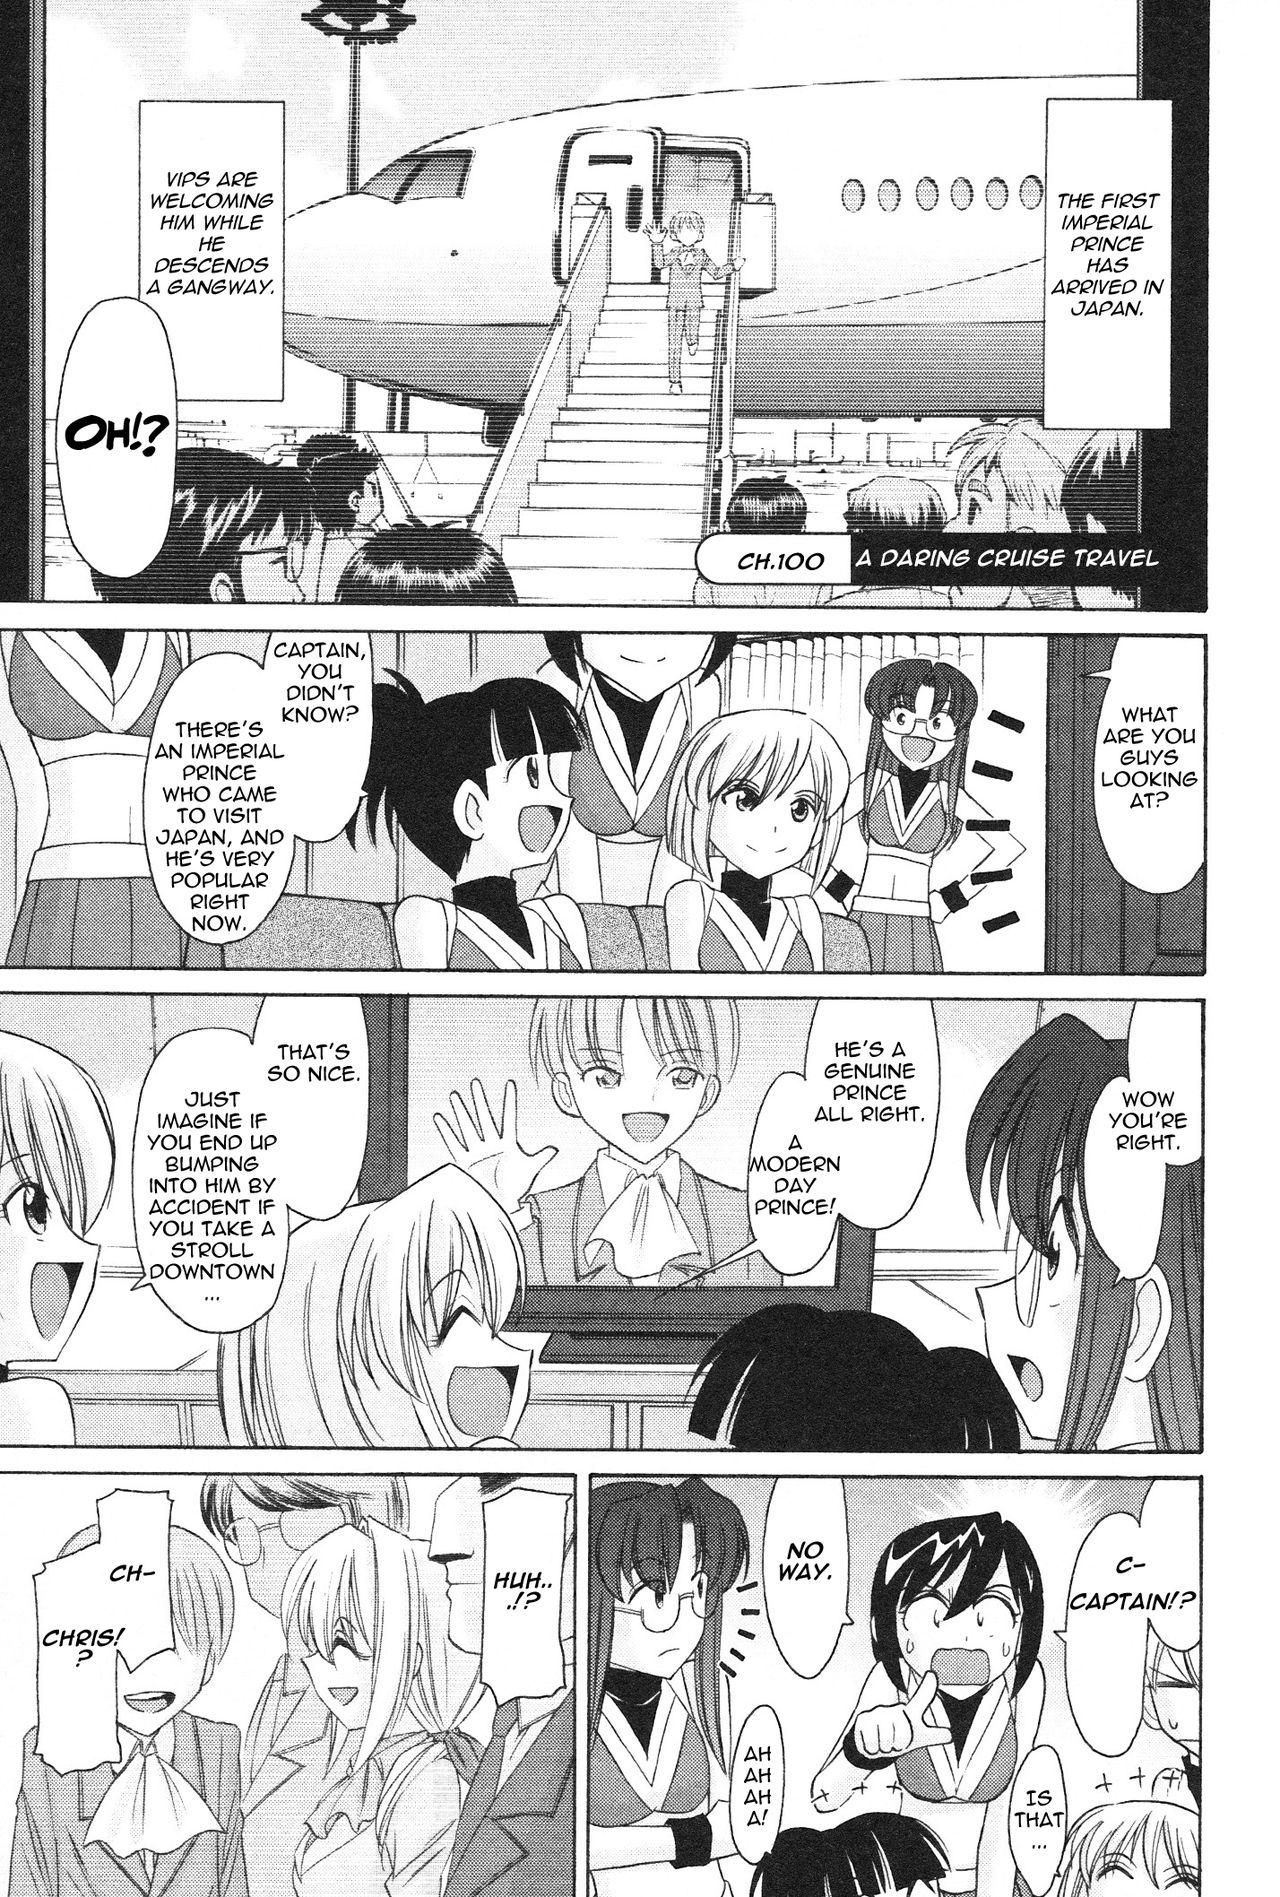 Shorts Cheers! 12 Ch.100 Dando - Page 2